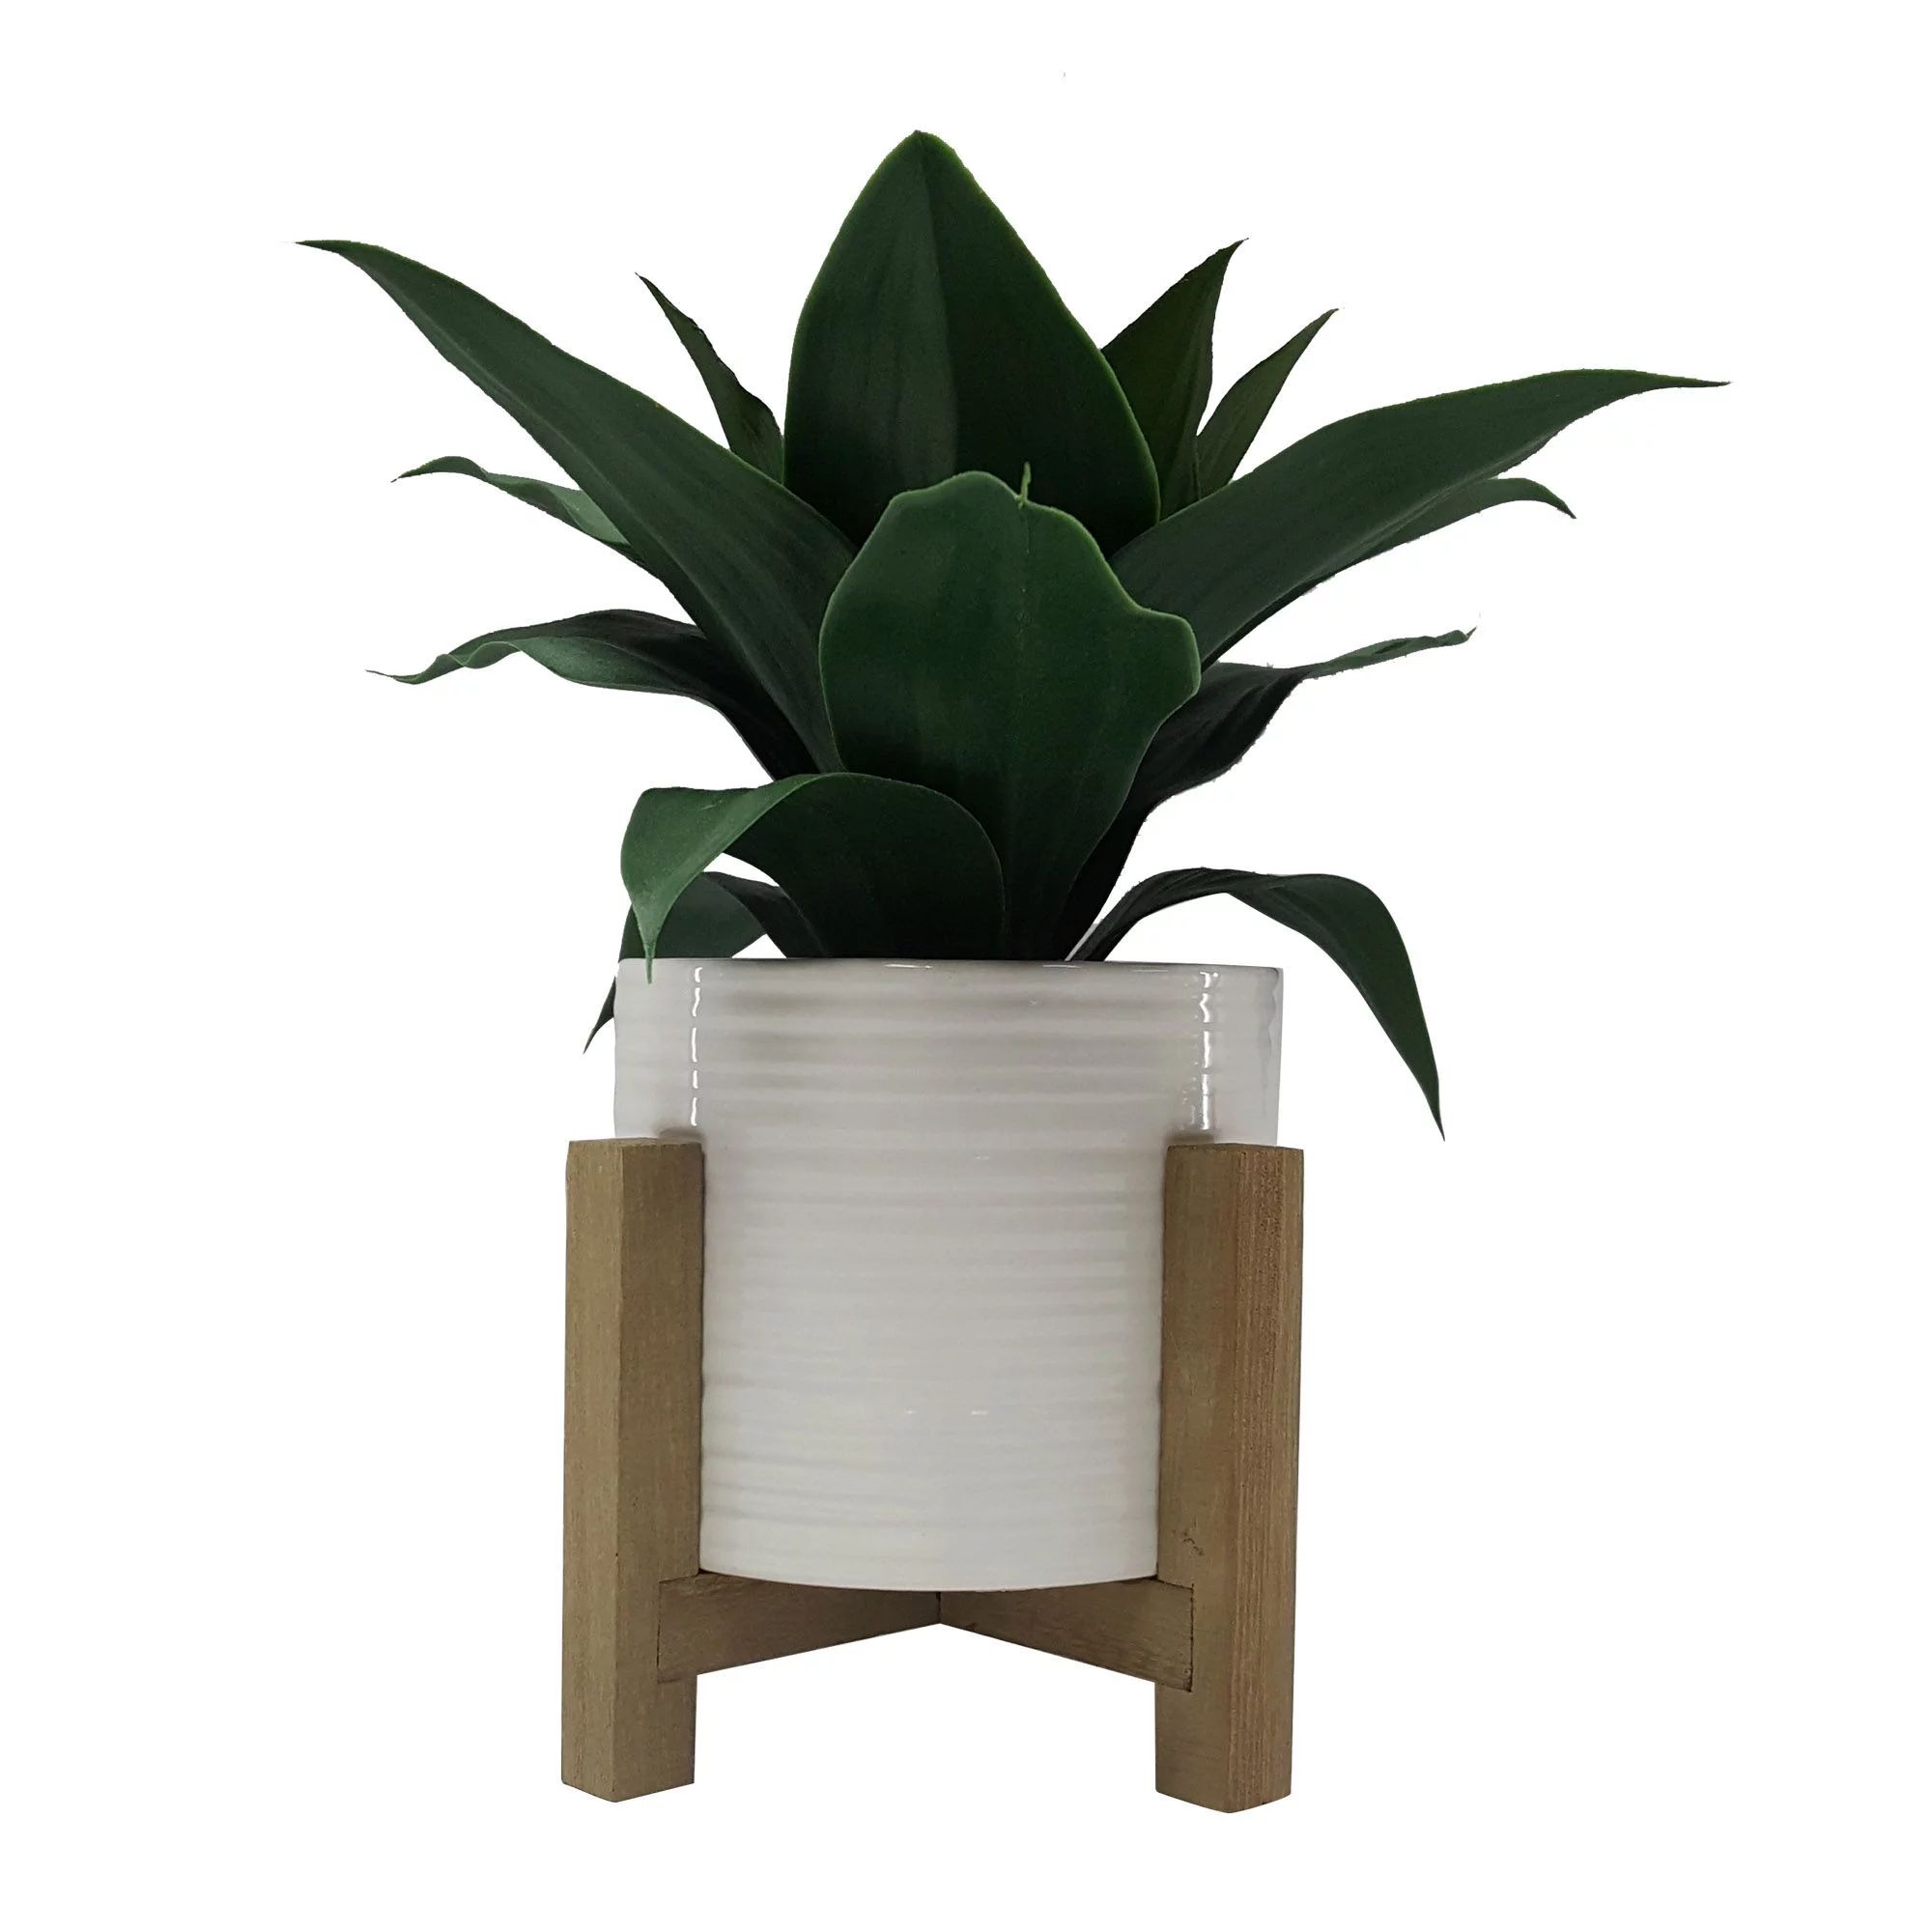 Better Homes & Gardens 10" Artificial Agave Plant in White Ceramic Pot with Wood Stand,Green Agav... | Walmart (US)